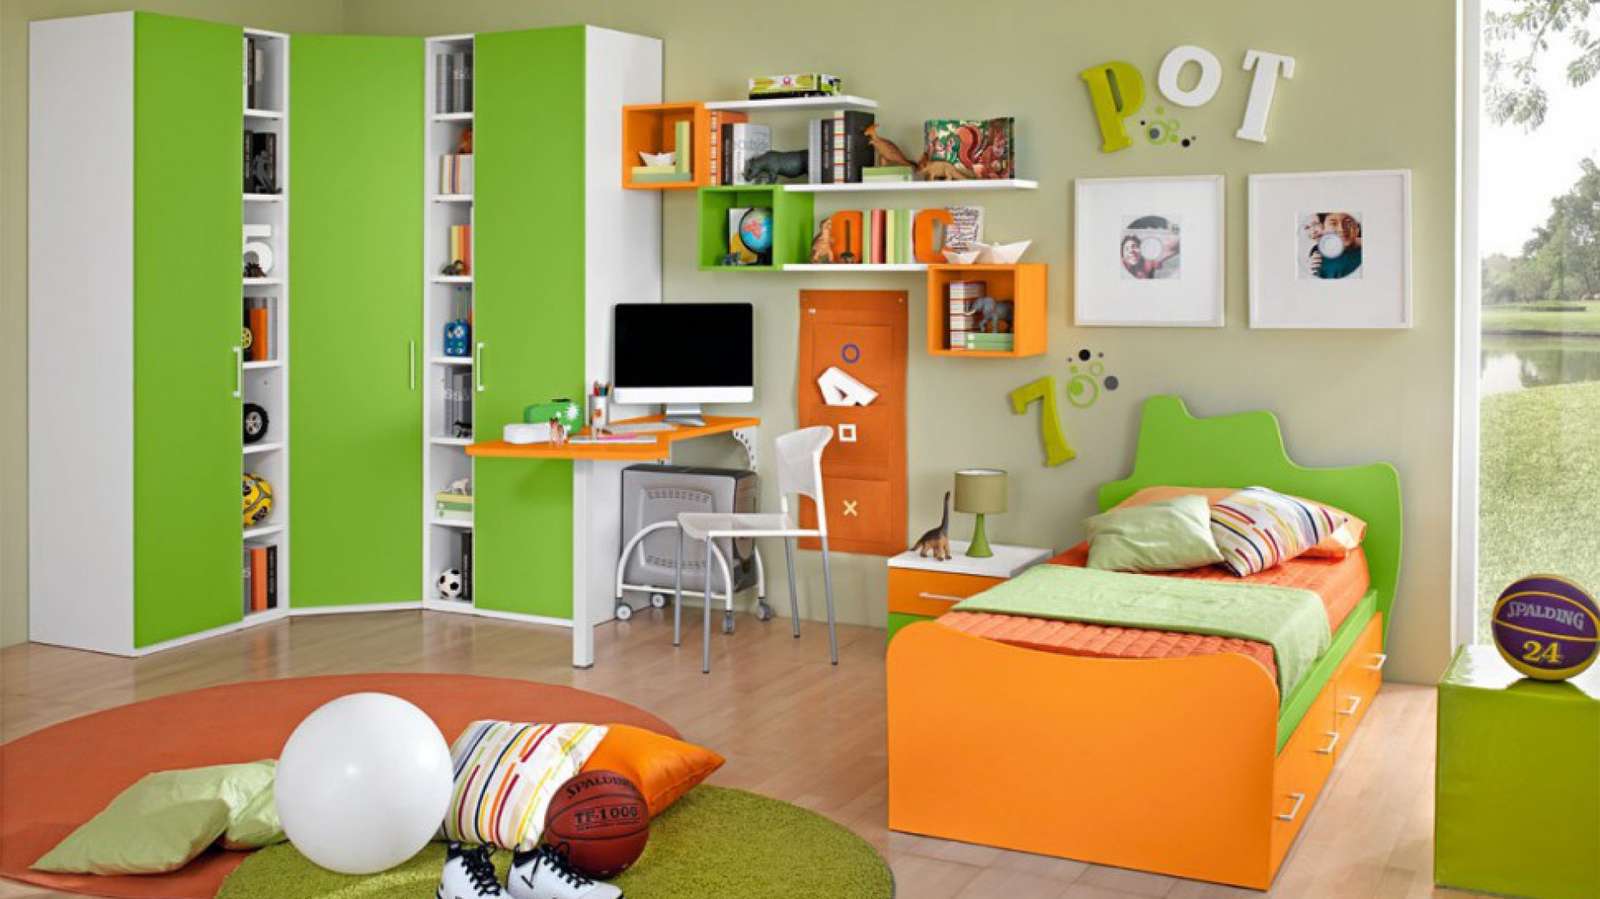 Room in green color jigsaw puzzle online